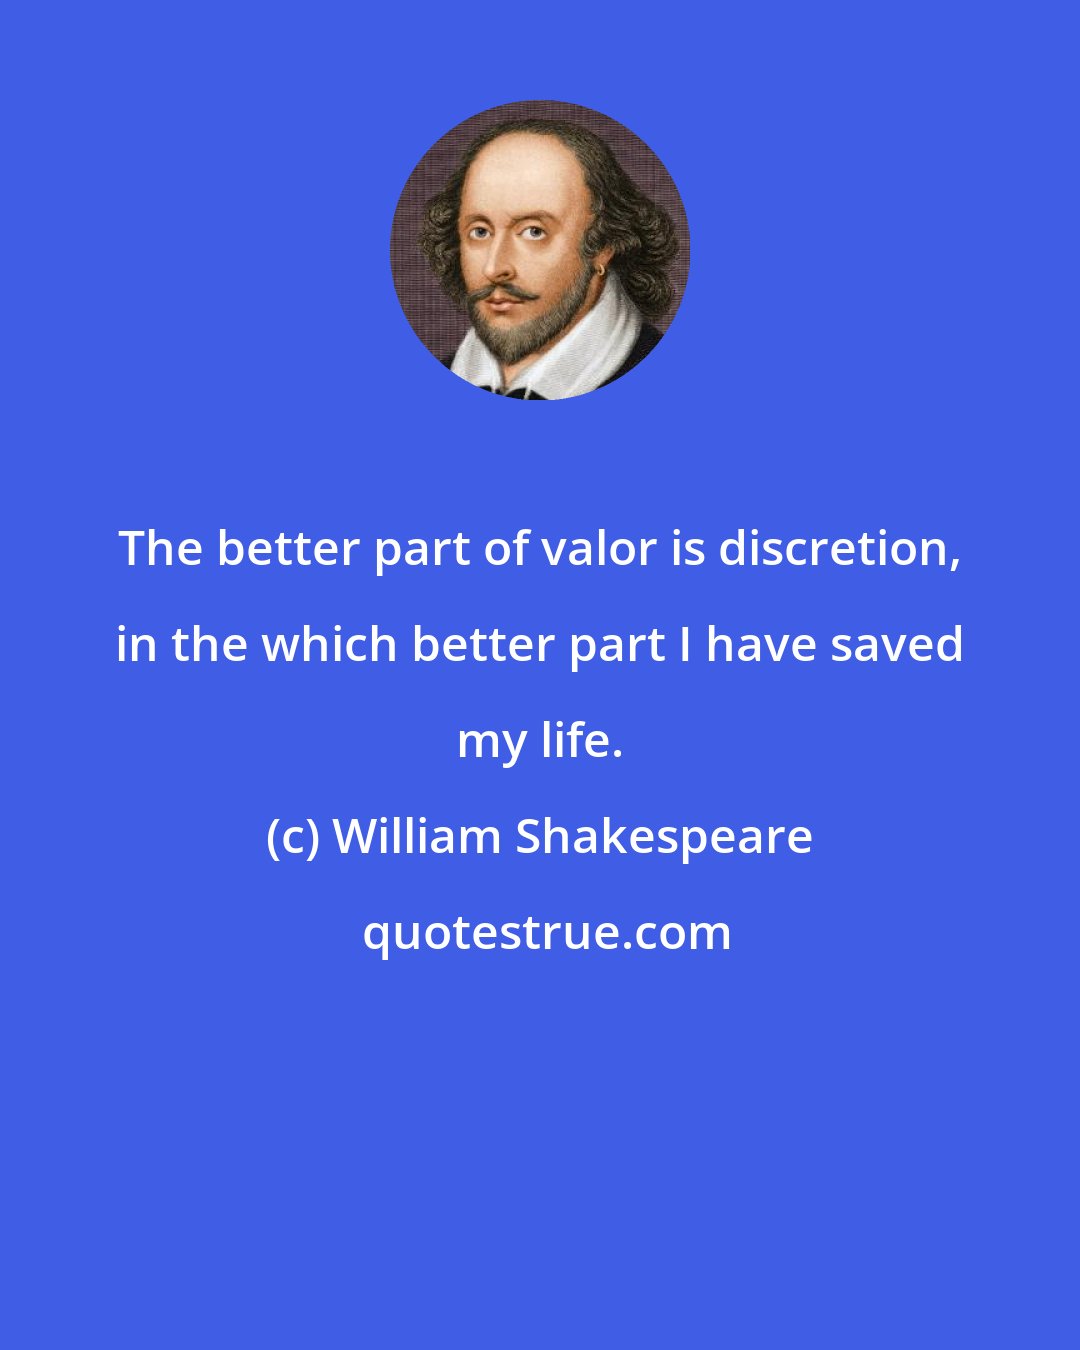 William Shakespeare: The better part of valor is discretion, in the which better part I have saved my life.